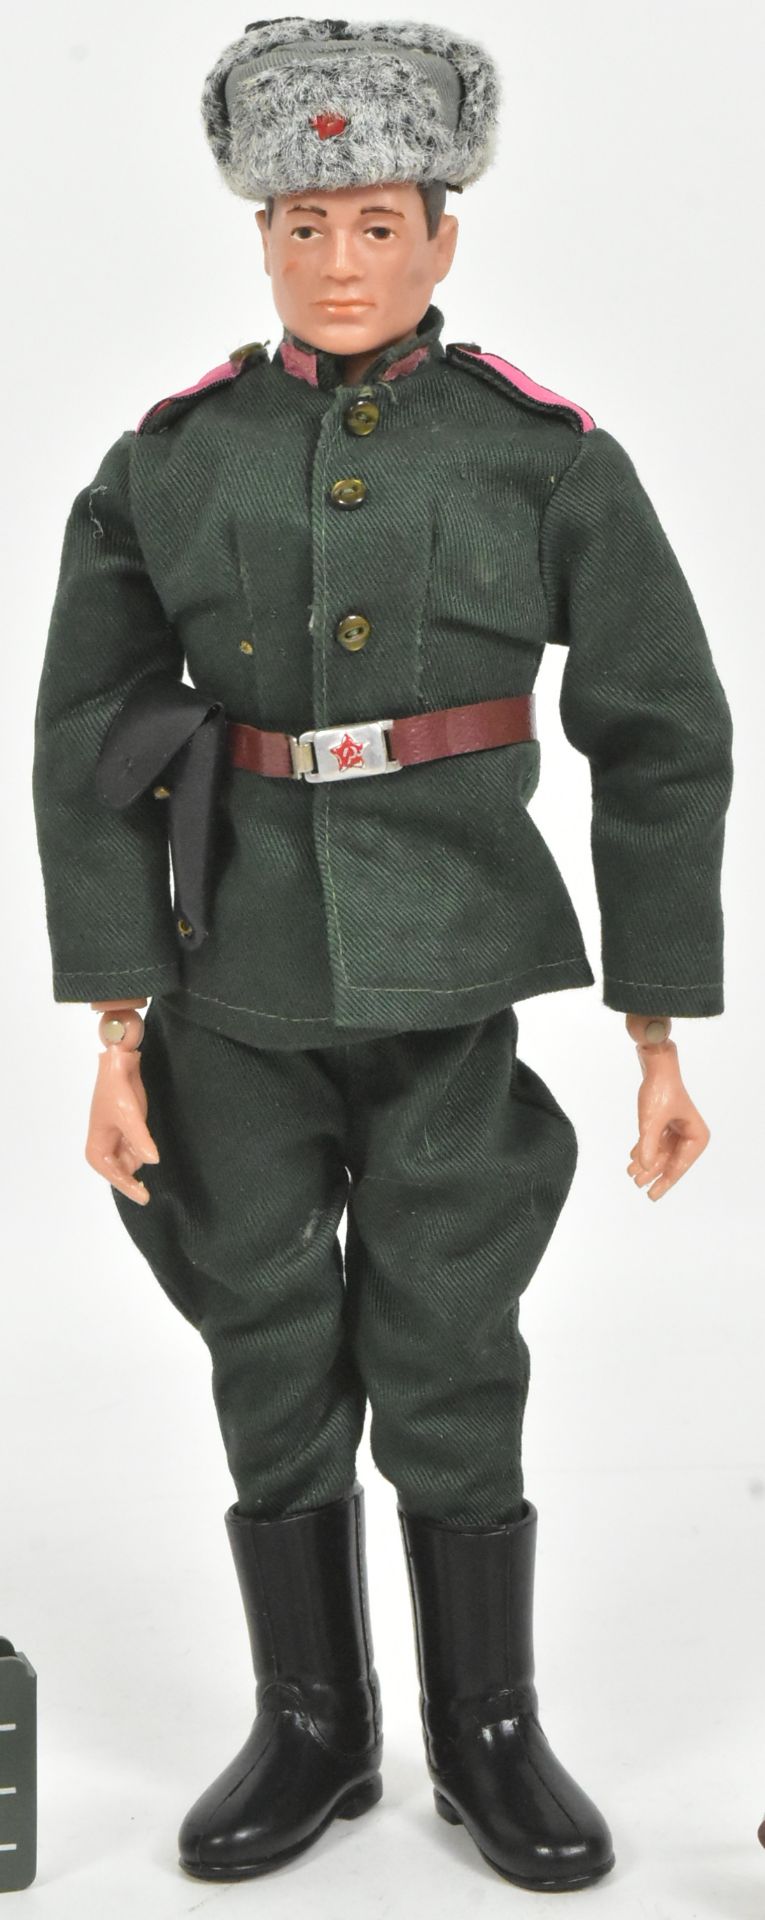 ACTION MAN - PALITOY - VINTAGE RUSSIAN INFANTRYMAN DOLL / FIGURE - Image 2 of 5